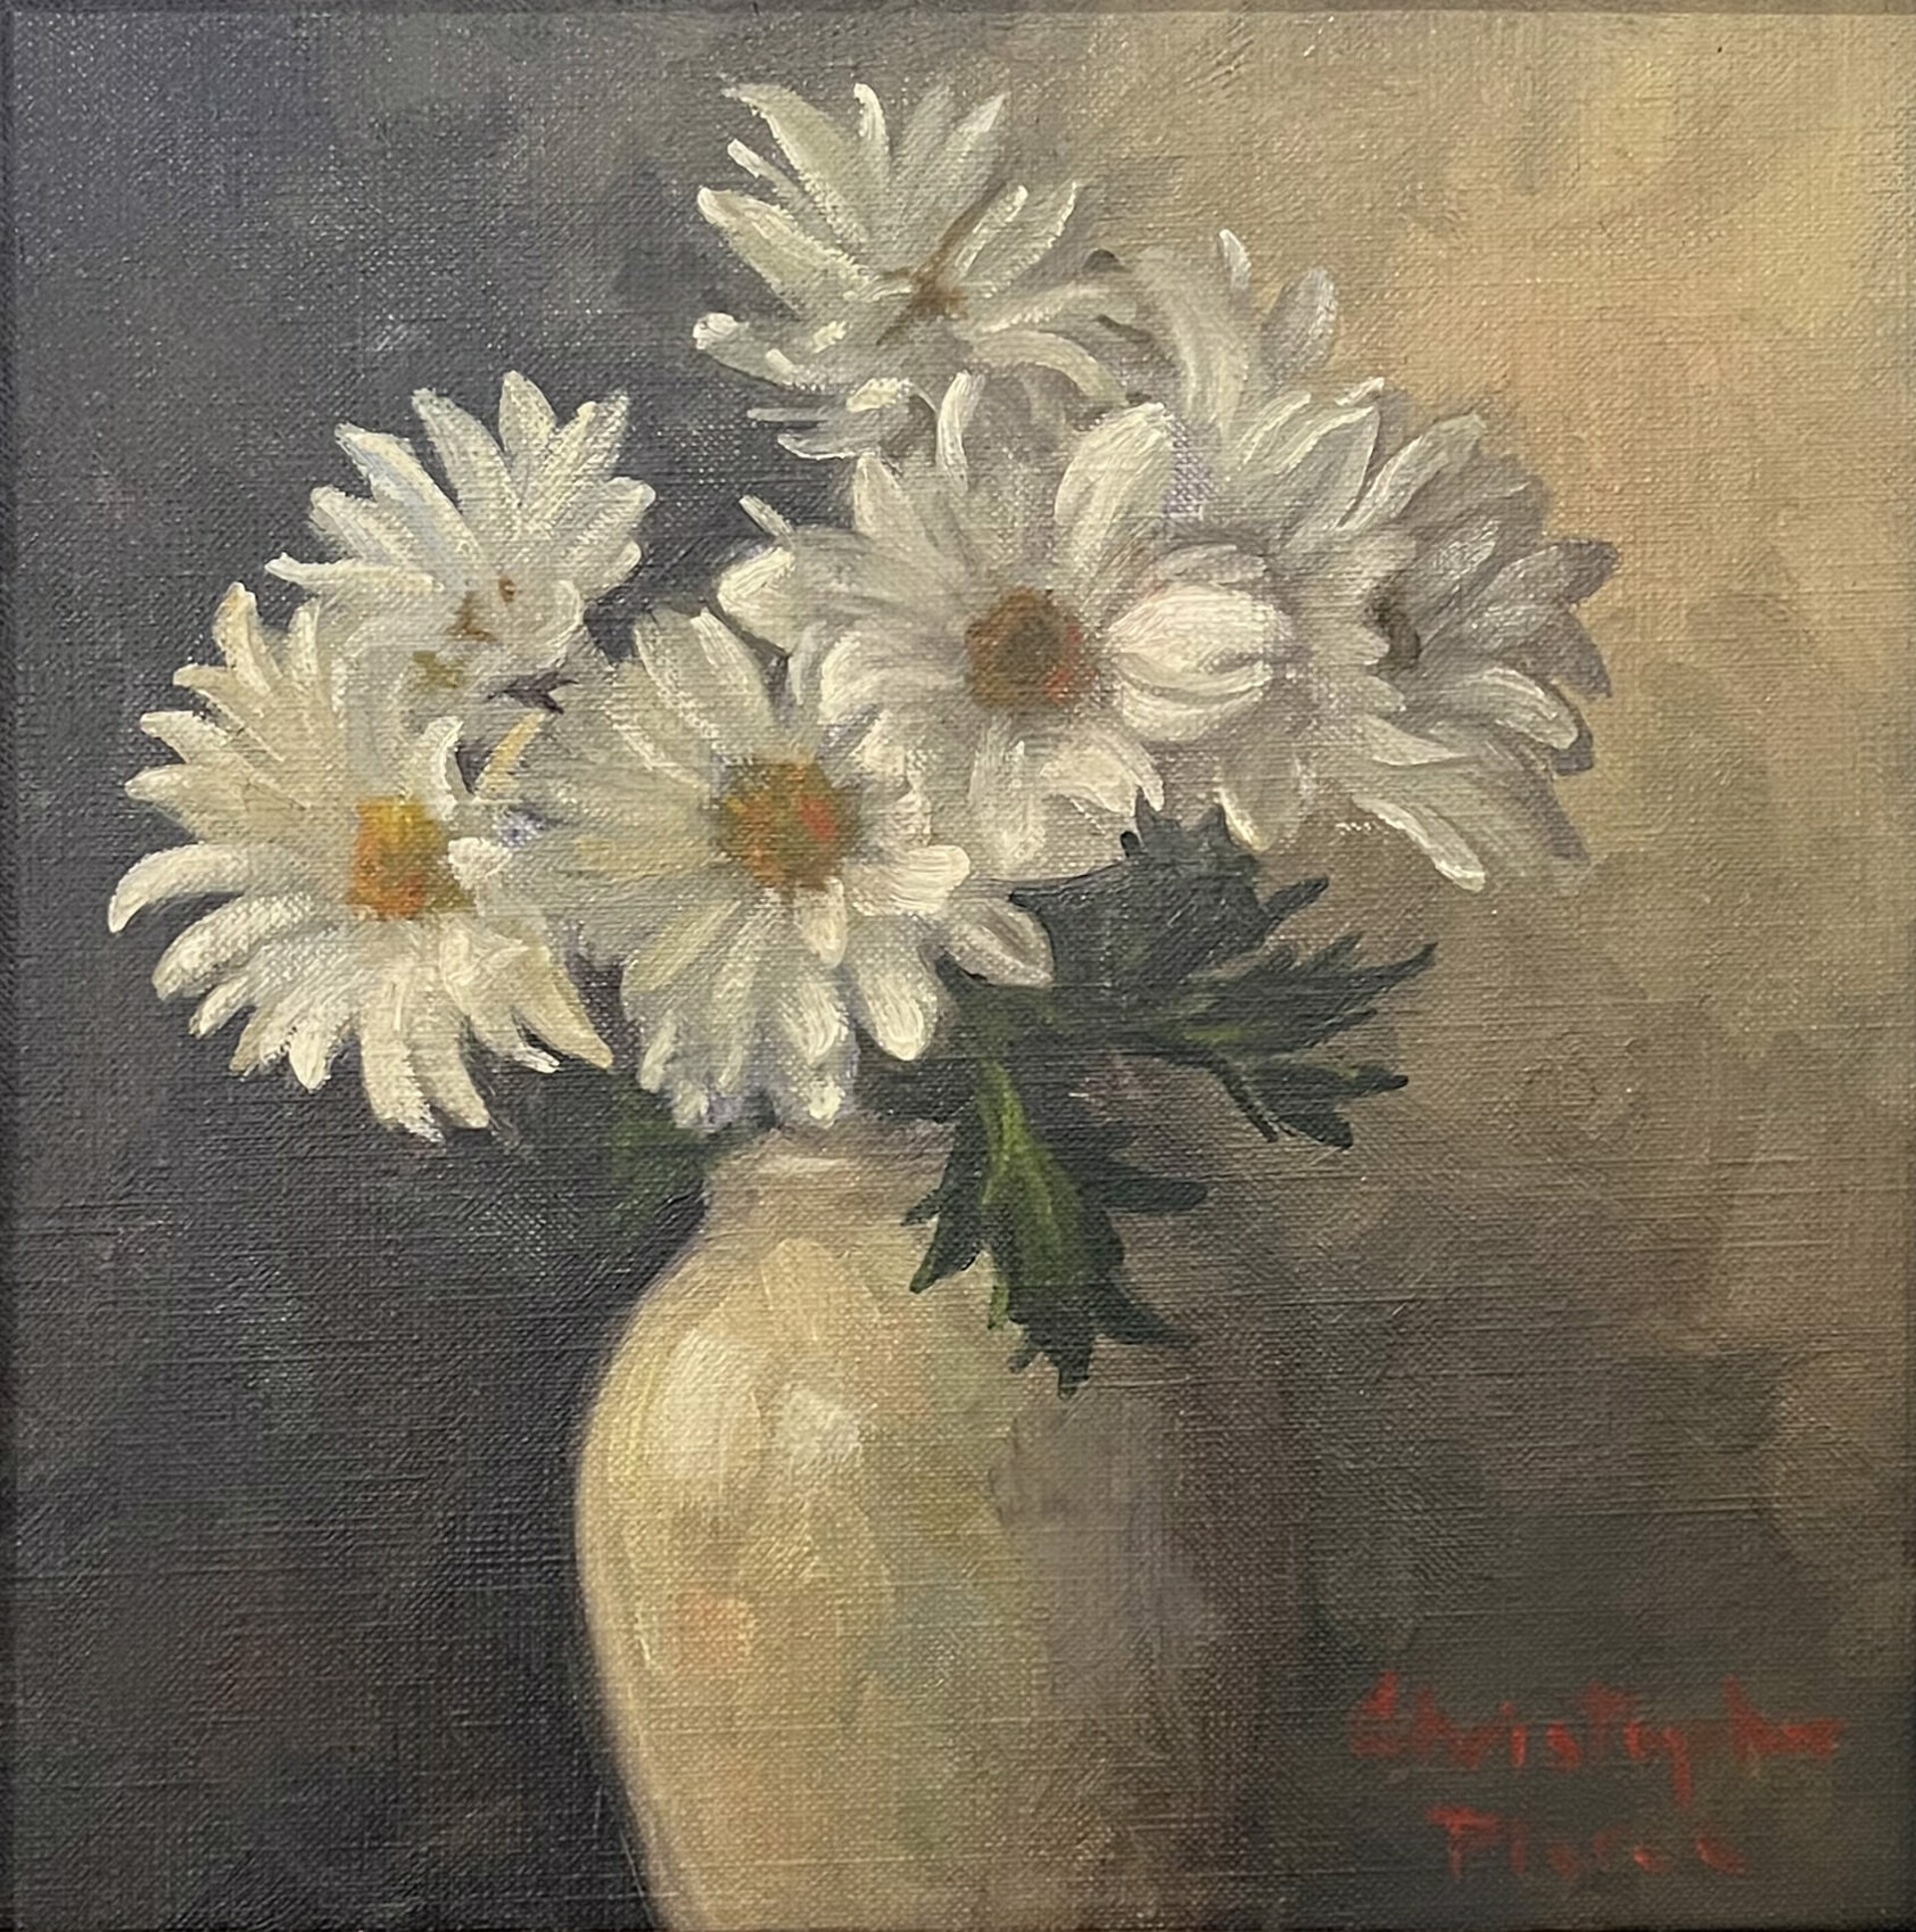 White Daisies by Christopher Pierce